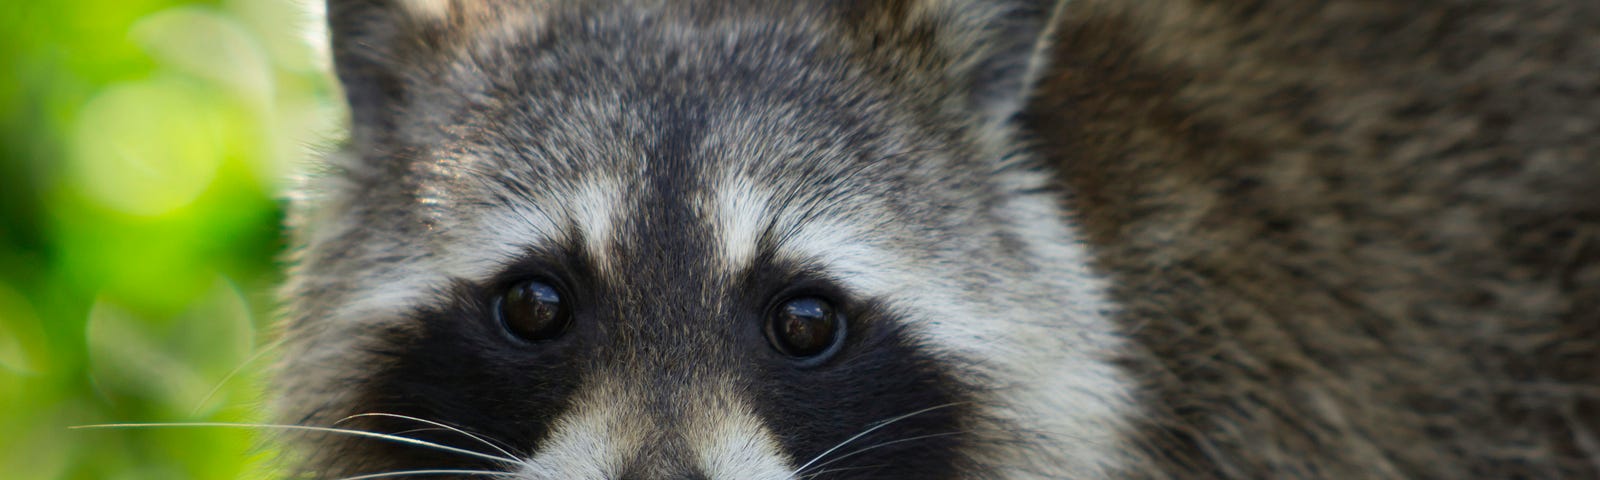 Raccoon staring into the camera